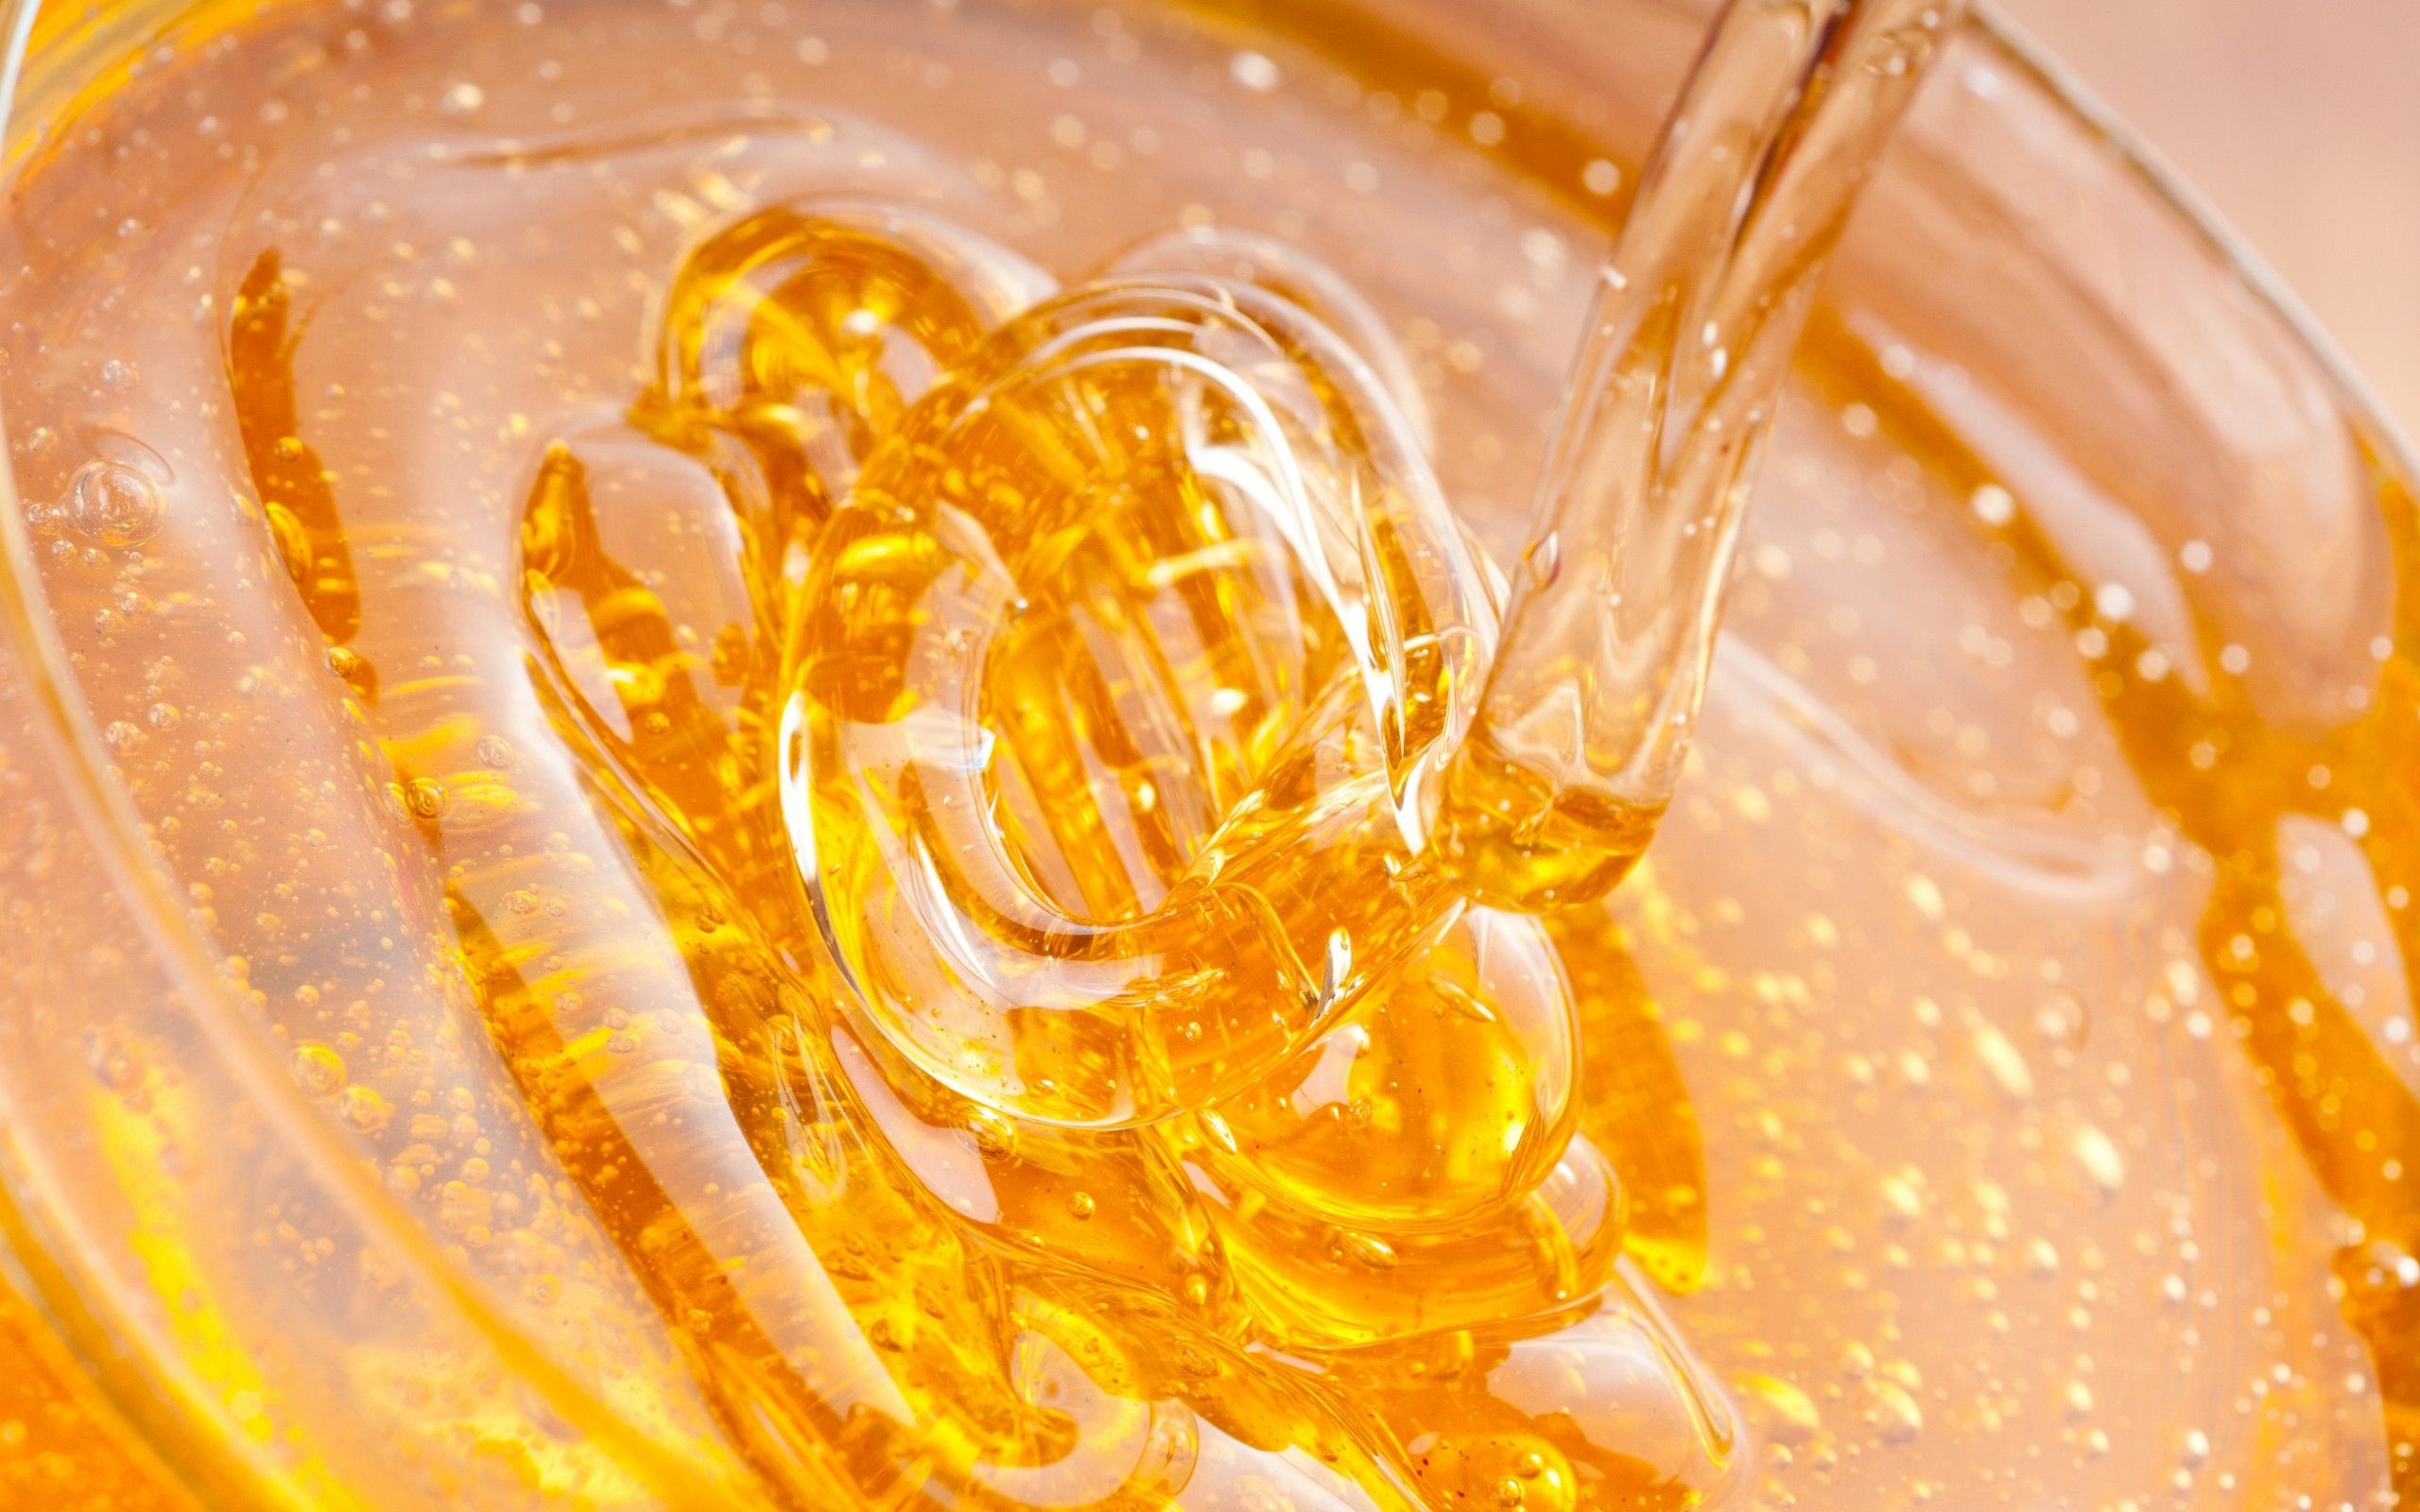 Honey: Essentially pure sugar, with no fat and only trace amounts of protein and fiber. 2560x1600 HD Wallpaper.